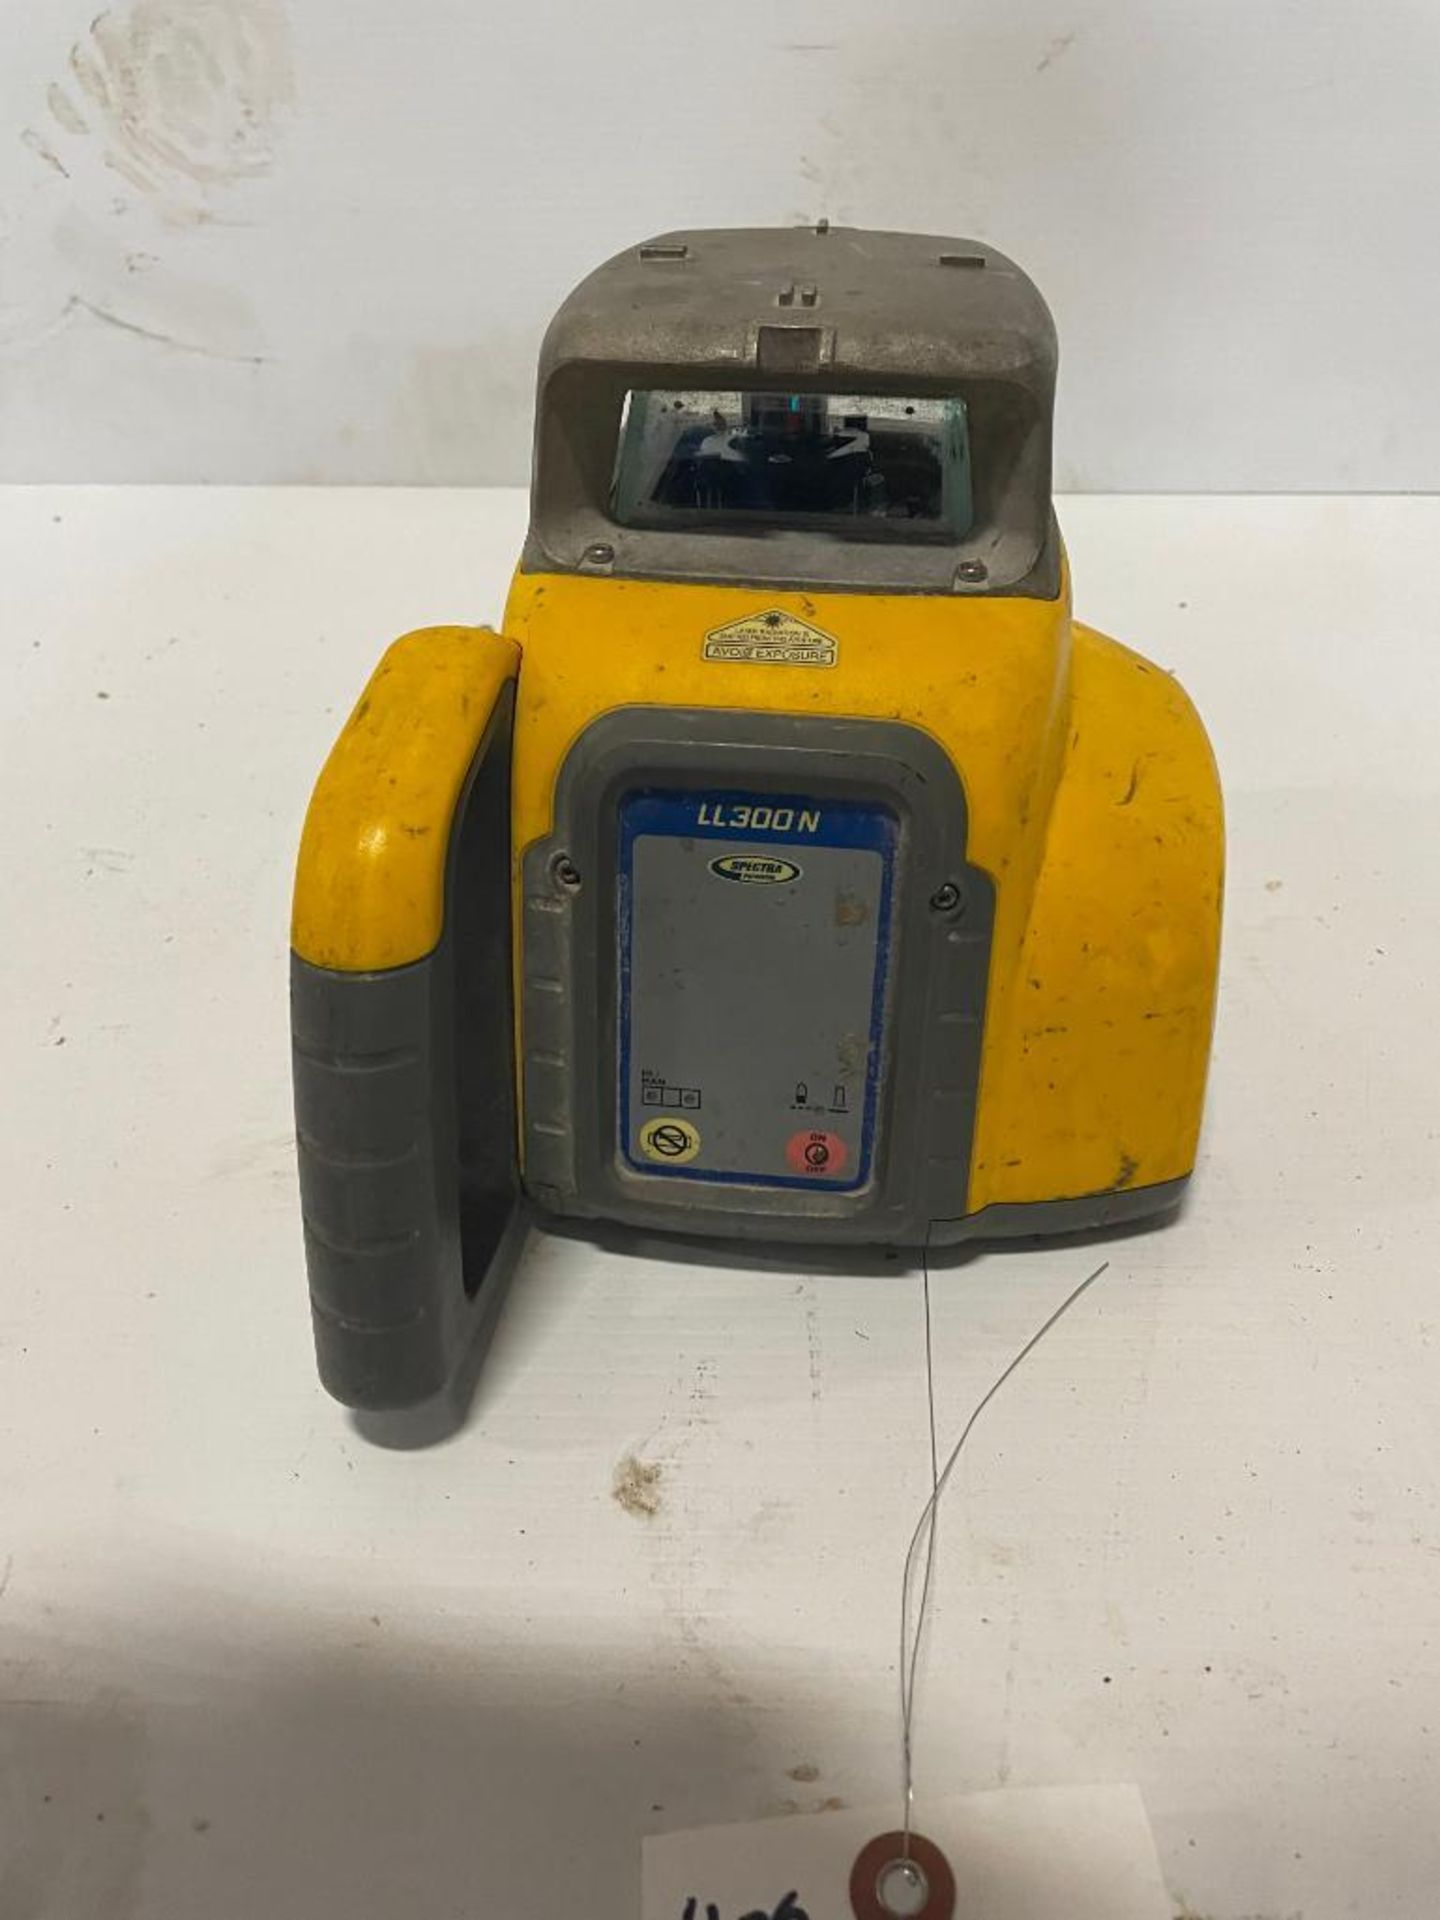 2014 Trimble LL300 Laser, Serial #14281609. Located in Hazelwood, MO